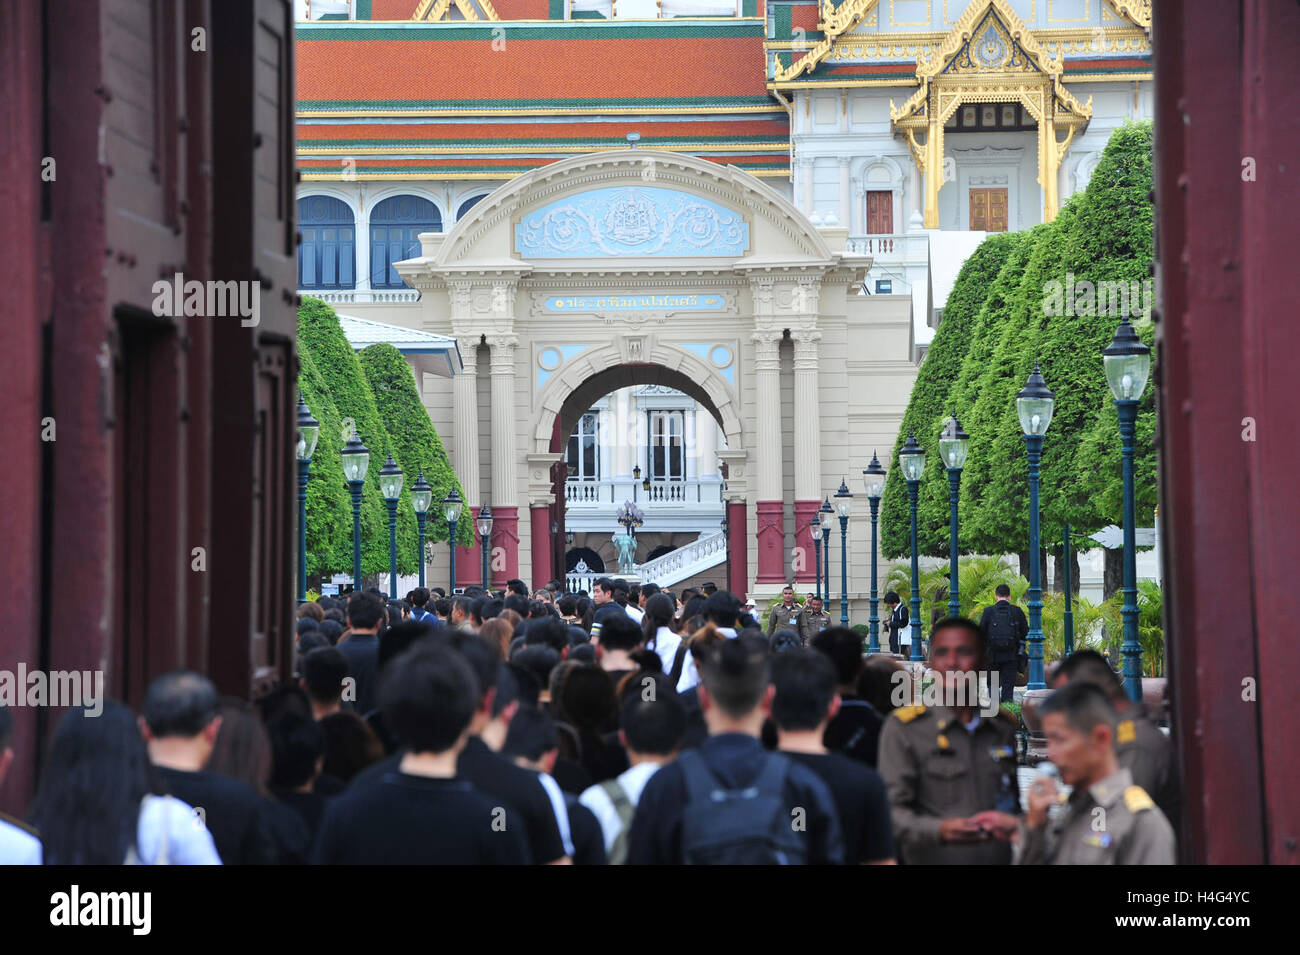 Bangkok, Thailand. 15th Oct, 2016. Thai citizens queue up at the Grand Palace to mourn for the late King Bhumibol Adulyadej in Bangkok, Thailand, Oct. 15, 2016. Mourners across the country gather around the Grand Palace to pay respect and bid farewell to Thailand's late King Bhumibol Adulyadej. Credit:  Rachen Sageamsak/Xinhua/Alamy Live News Stock Photo